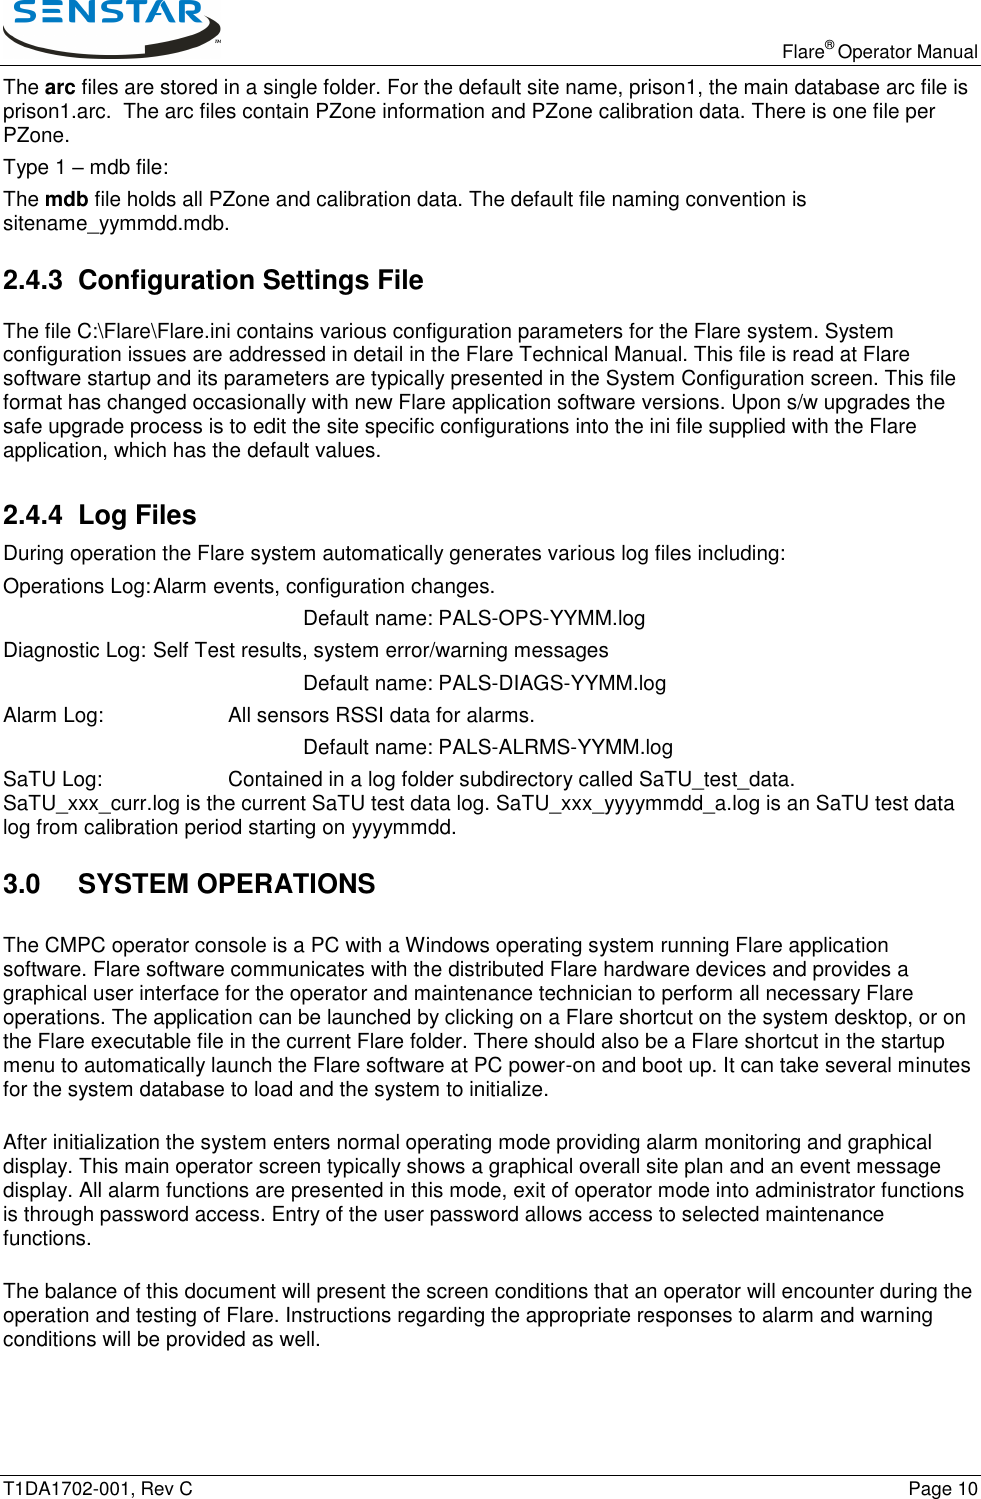   Flare® Operator Manual T1DA1702-001, Rev C    Page 10 The arc files are stored in a single folder. For the default site name, prison1, the main database arc file is prison1.arc.  The arc files contain PZone information and PZone calibration data. There is one file per PZone. Type 1 – mdb file: The mdb file holds all PZone and calibration data. The default file naming convention is sitename_yymmdd.mdb. 2.4.3 Configuration Settings File The file C:\Flare\Flare.ini contains various configuration parameters for the Flare system. System configuration issues are addressed in detail in the Flare Technical Manual. This file is read at Flare software startup and its parameters are typically presented in the System Configuration screen. This file format has changed occasionally with new Flare application software versions. Upon s/w upgrades the safe upgrade process is to edit the site specific configurations into the ini file supplied with the Flare application, which has the default values. 2.4.4 Log Files During operation the Flare system automatically generates various log files including: Operations Log: Alarm events, configuration changes.         Default name: PALS-OPS-YYMM.log Diagnostic Log: Self Test results, system error/warning messages         Default name: PALS-DIAGS-YYMM.log Alarm Log:    All sensors RSSI data for alarms.         Default name: PALS-ALRMS-YYMM.log SaTU Log:    Contained in a log folder subdirectory called SaTU_test_data. SaTU_xxx_curr.log is the current SaTU test data log. SaTU_xxx_yyyymmdd_a.log is an SaTU test data log from calibration period starting on yyyymmdd.  3.0  SYSTEM OPERATIONS The CMPC operator console is a PC with a Windows operating system running Flare application software. Flare software communicates with the distributed Flare hardware devices and provides a graphical user interface for the operator and maintenance technician to perform all necessary Flare operations. The application can be launched by clicking on a Flare shortcut on the system desktop, or on the Flare executable file in the current Flare folder. There should also be a Flare shortcut in the startup menu to automatically launch the Flare software at PC power-on and boot up. It can take several minutes for the system database to load and the system to initialize. After initialization the system enters normal operating mode providing alarm monitoring and graphical display. This main operator screen typically shows a graphical overall site plan and an event message display. All alarm functions are presented in this mode, exit of operator mode into administrator functions is through password access. Entry of the user password allows access to selected maintenance functions. The balance of this document will present the screen conditions that an operator will encounter during the operation and testing of Flare. Instructions regarding the appropriate responses to alarm and warning conditions will be provided as well. 